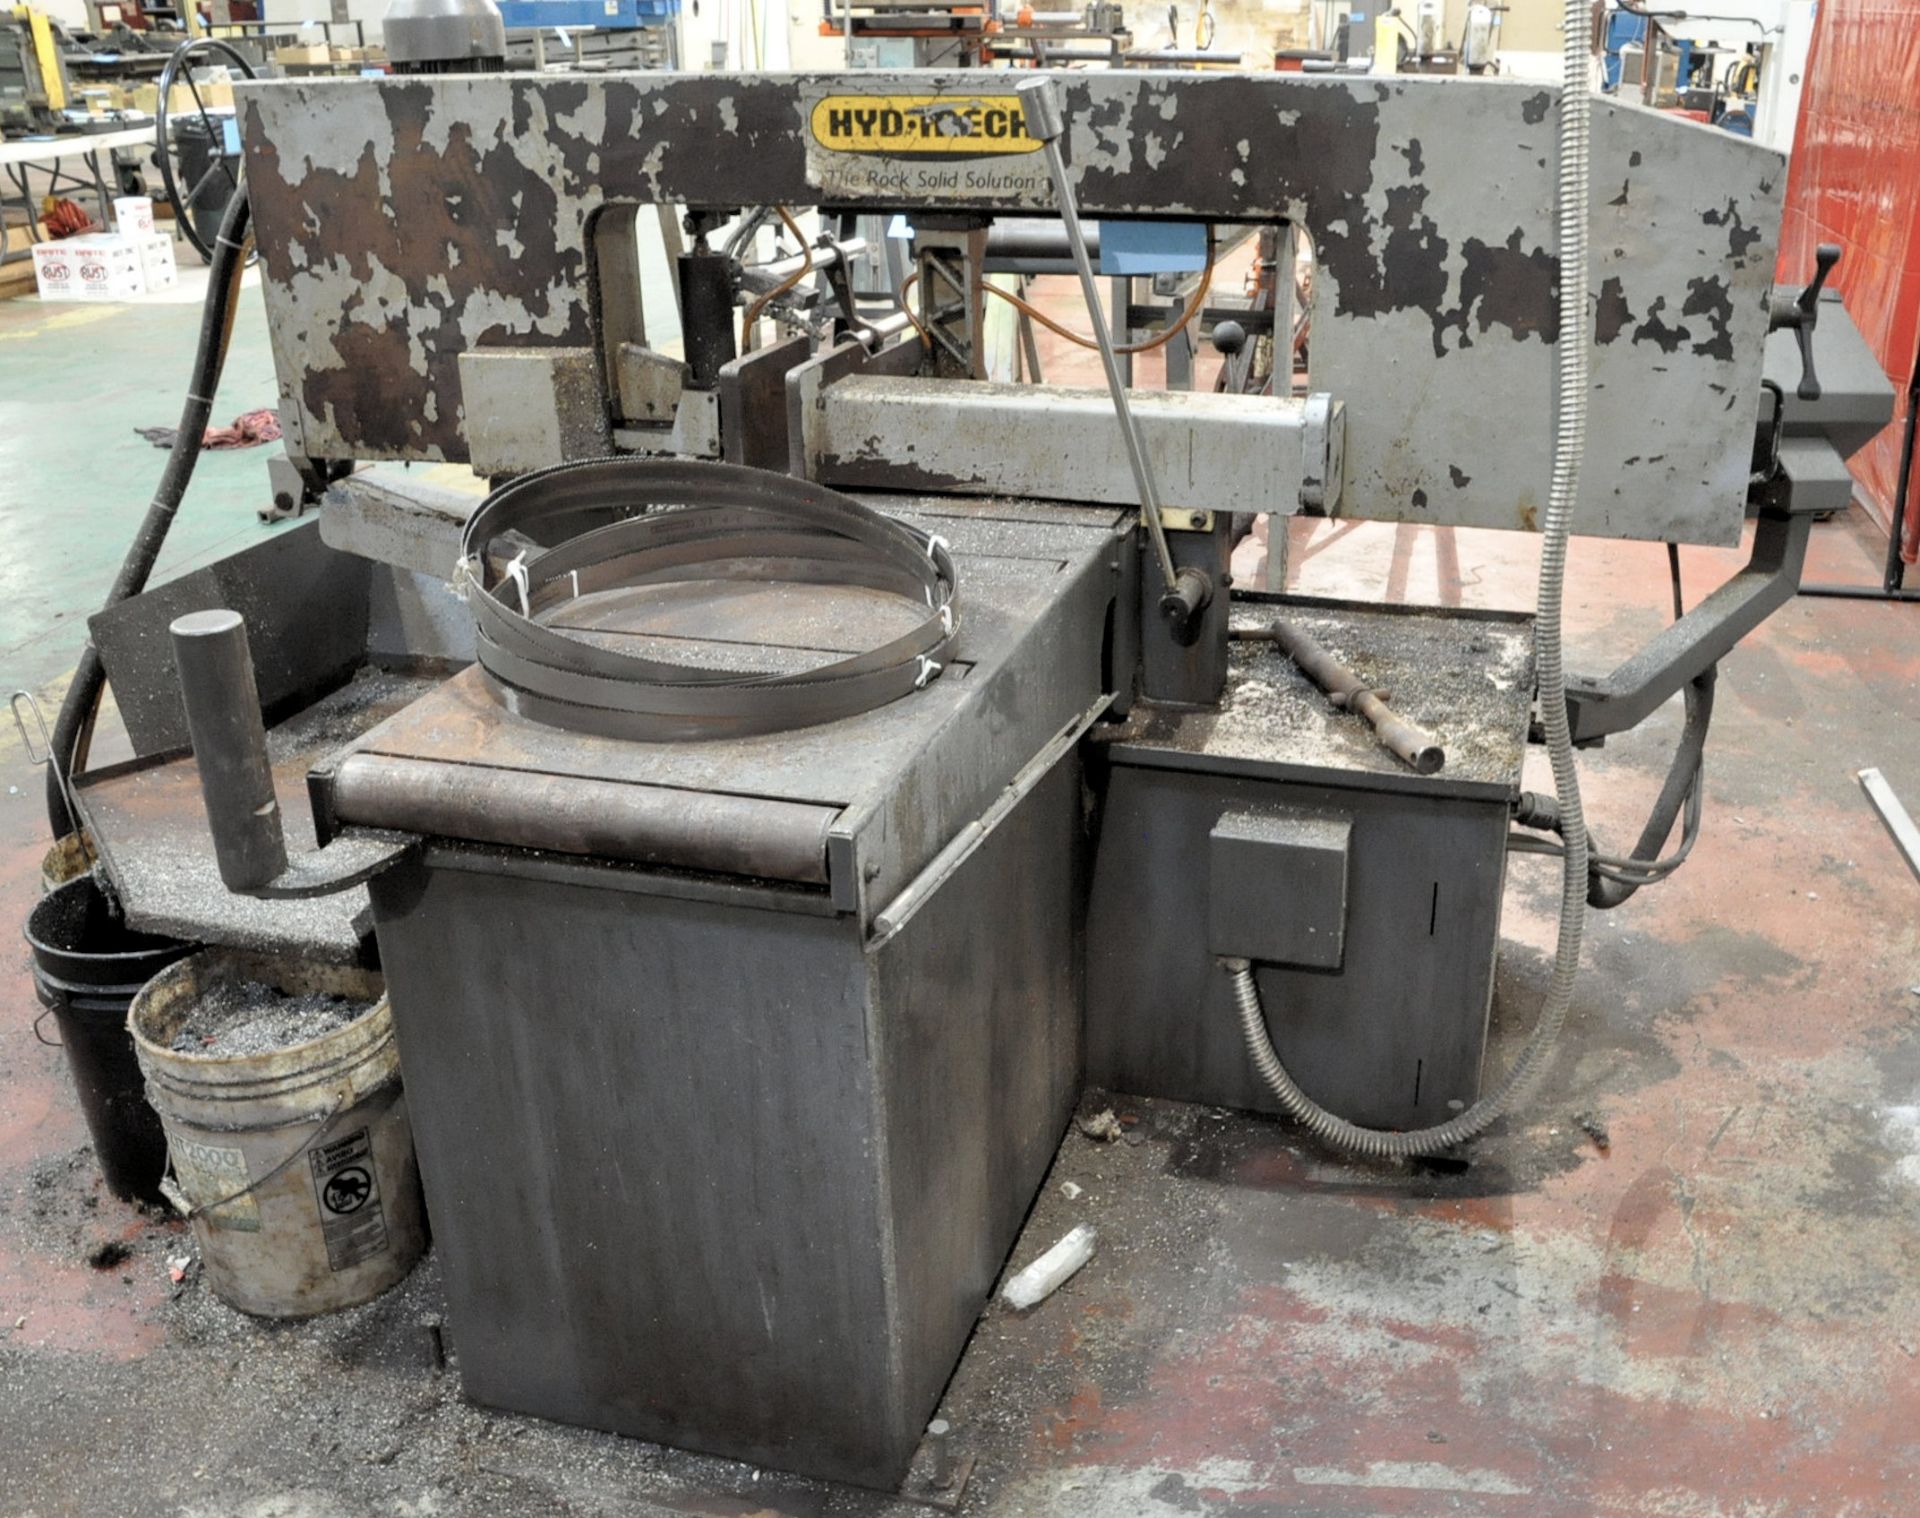 Hyd-Mech S-20 Series III, Horizontal Band Saw, 13" x 18" Capacity, Head Miters to 30 Degrees (2009) - Image 3 of 5